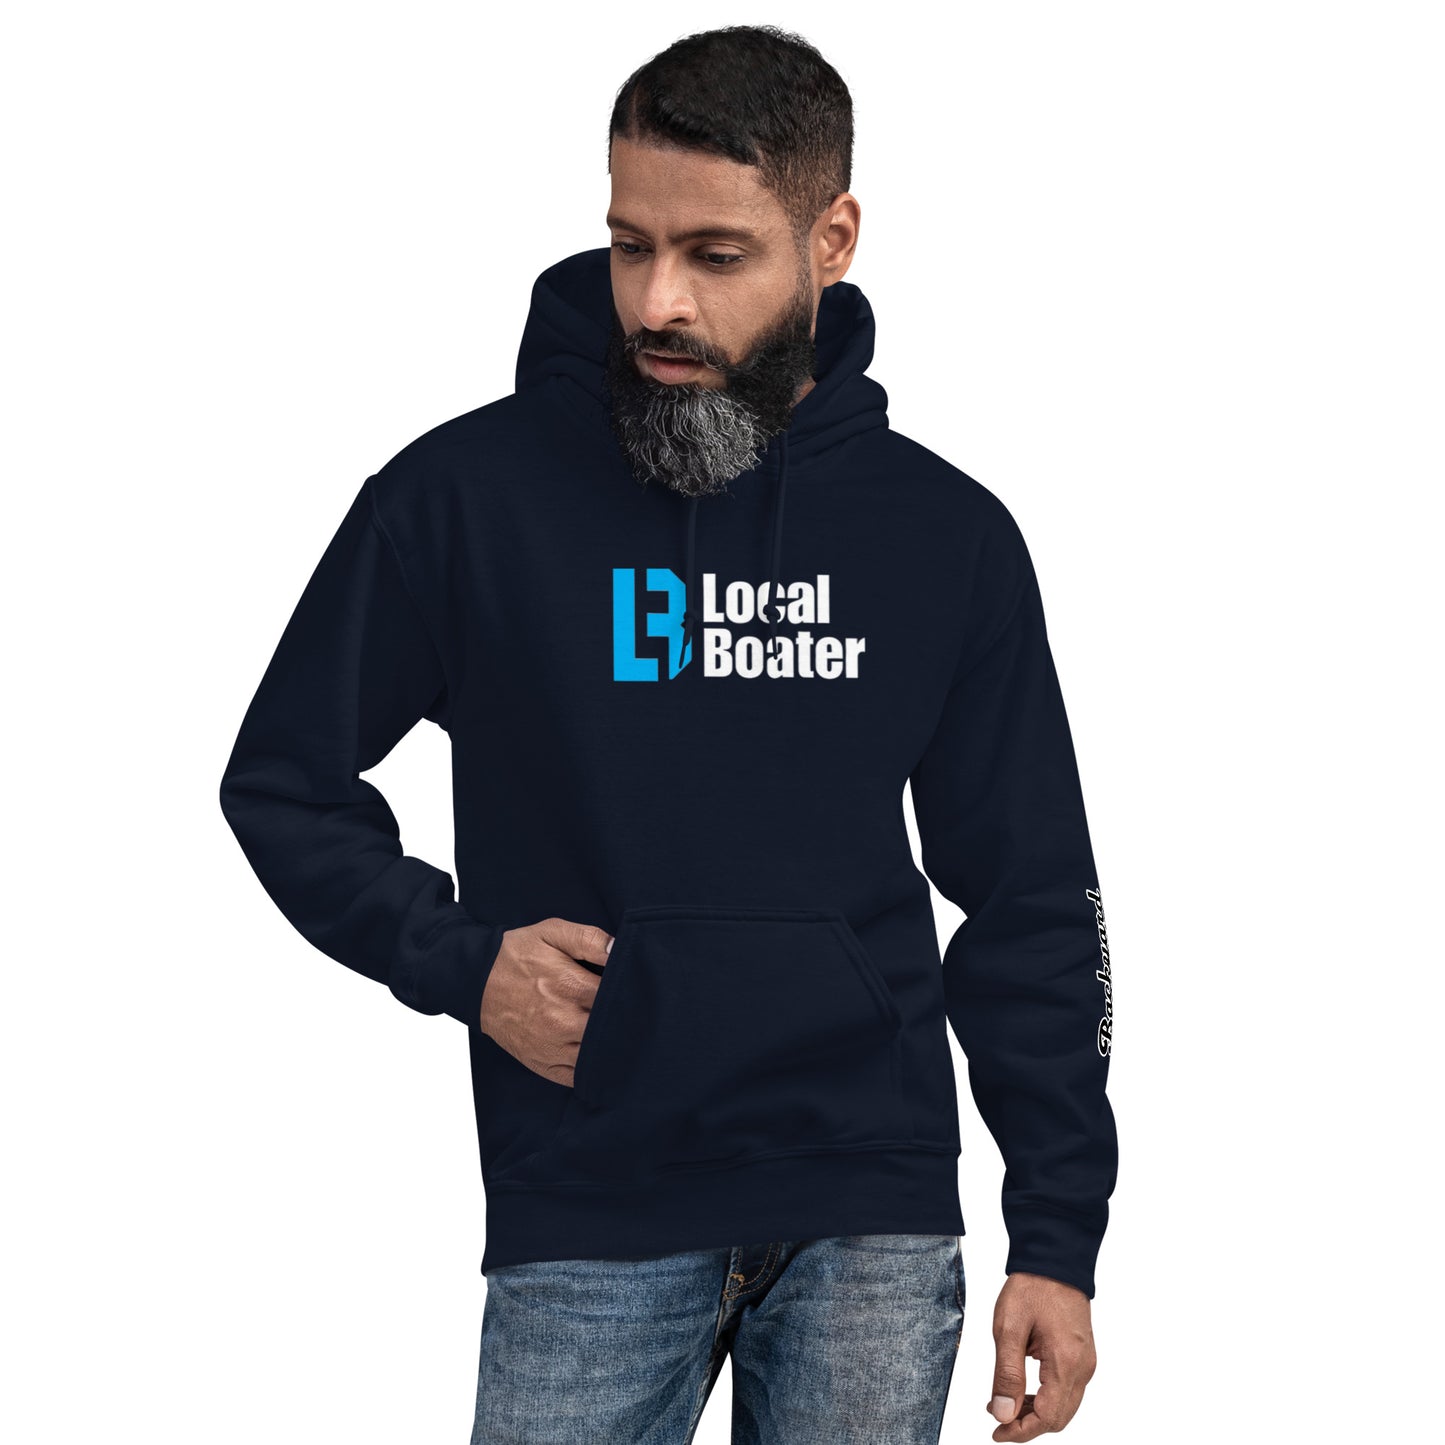 Local Boater Unisex Hoodie